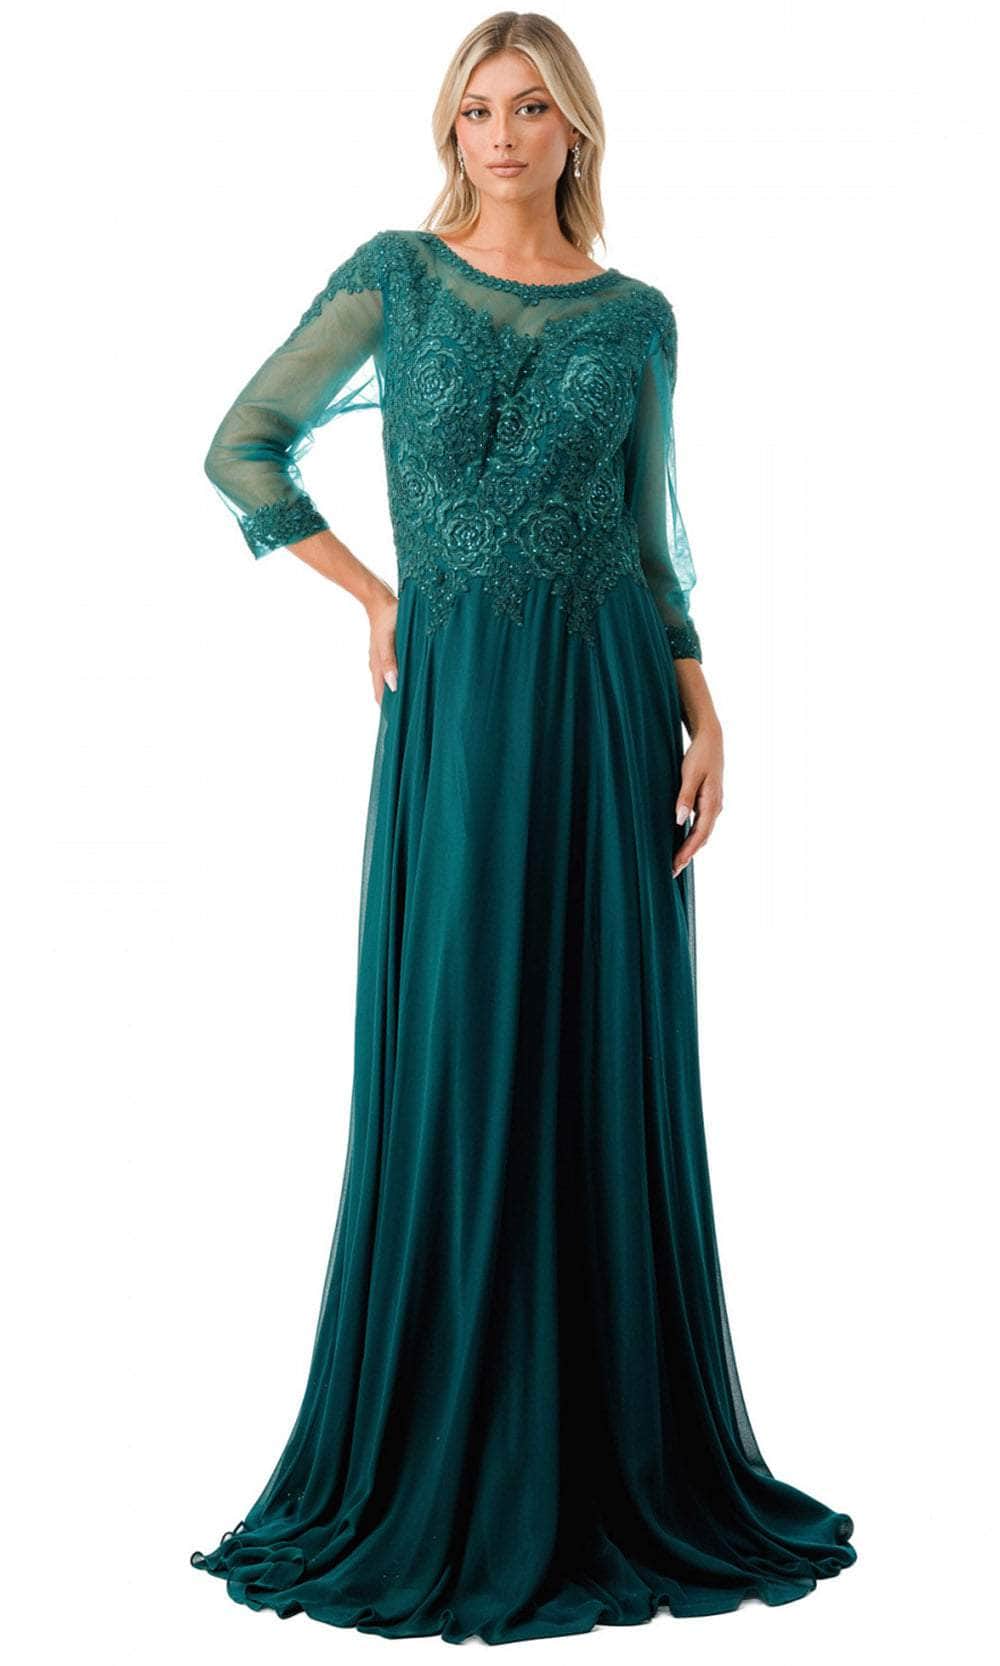 Aspeed Design M2723J - Beaded Lace Illusion Evening Gown
